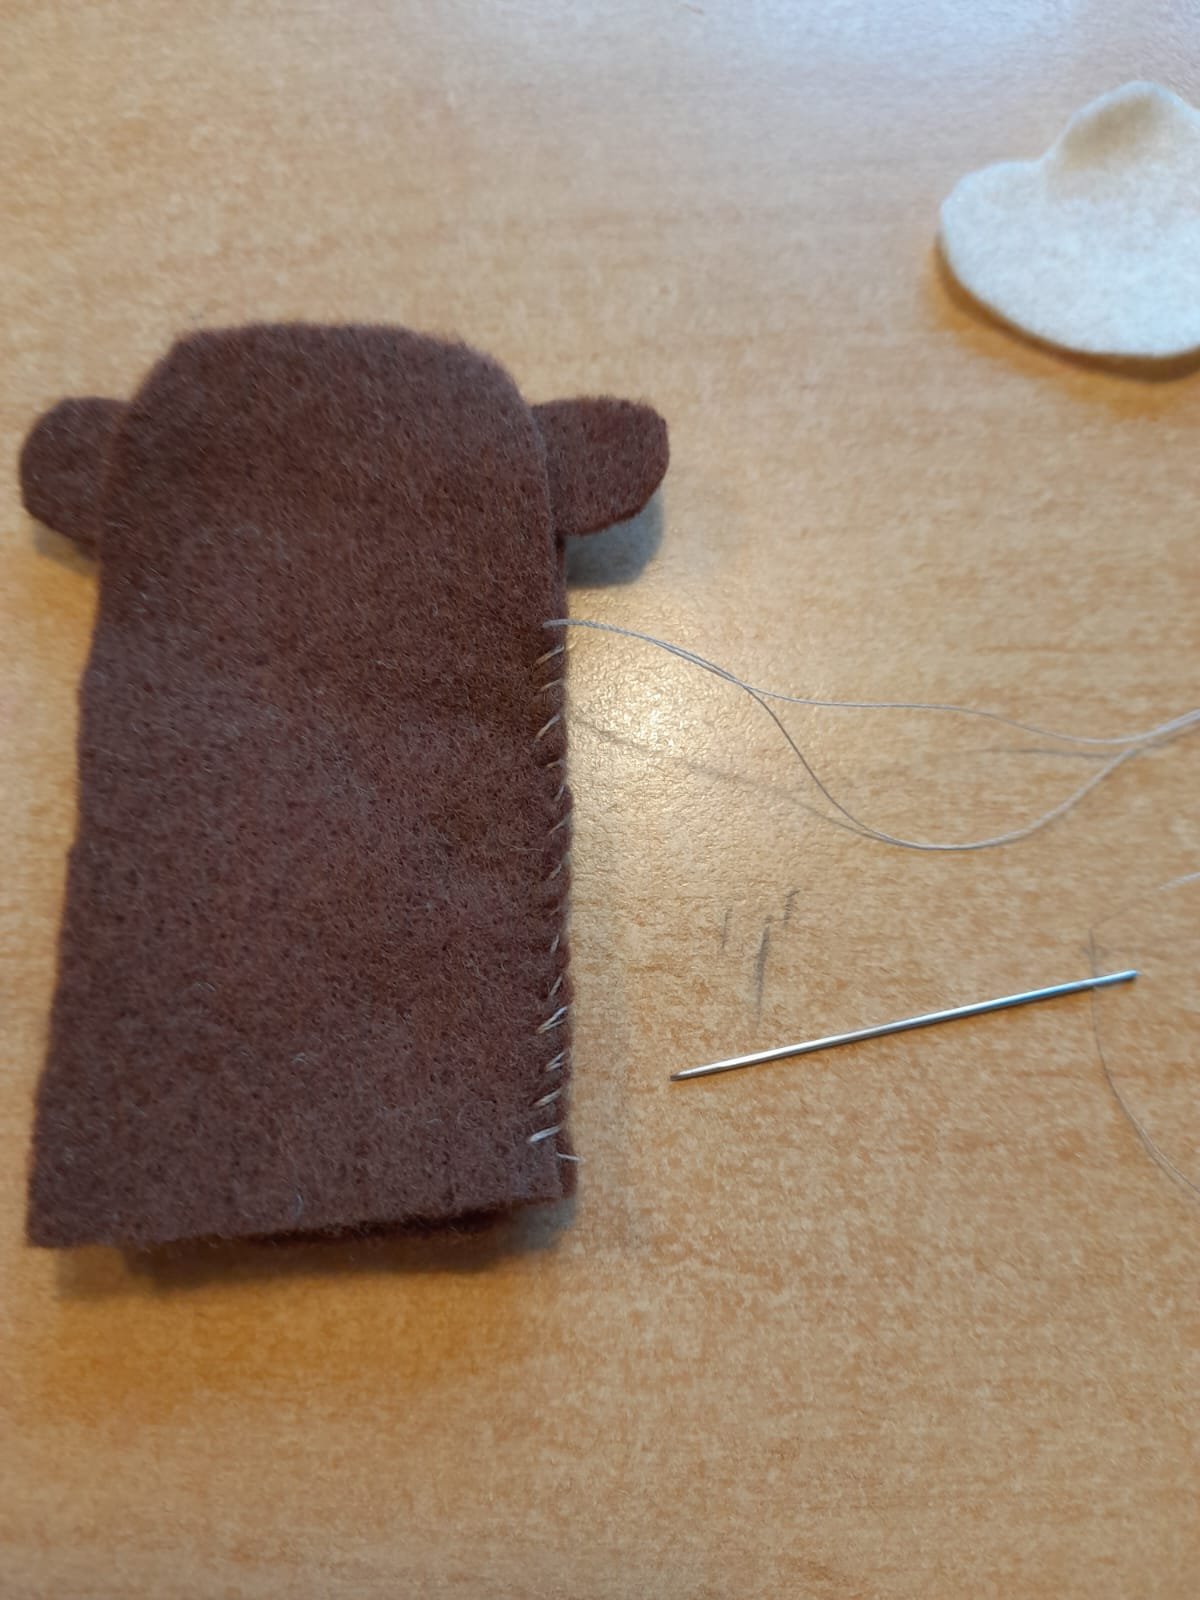 Stick or sew bodies together - don't forget to pop the ears in!